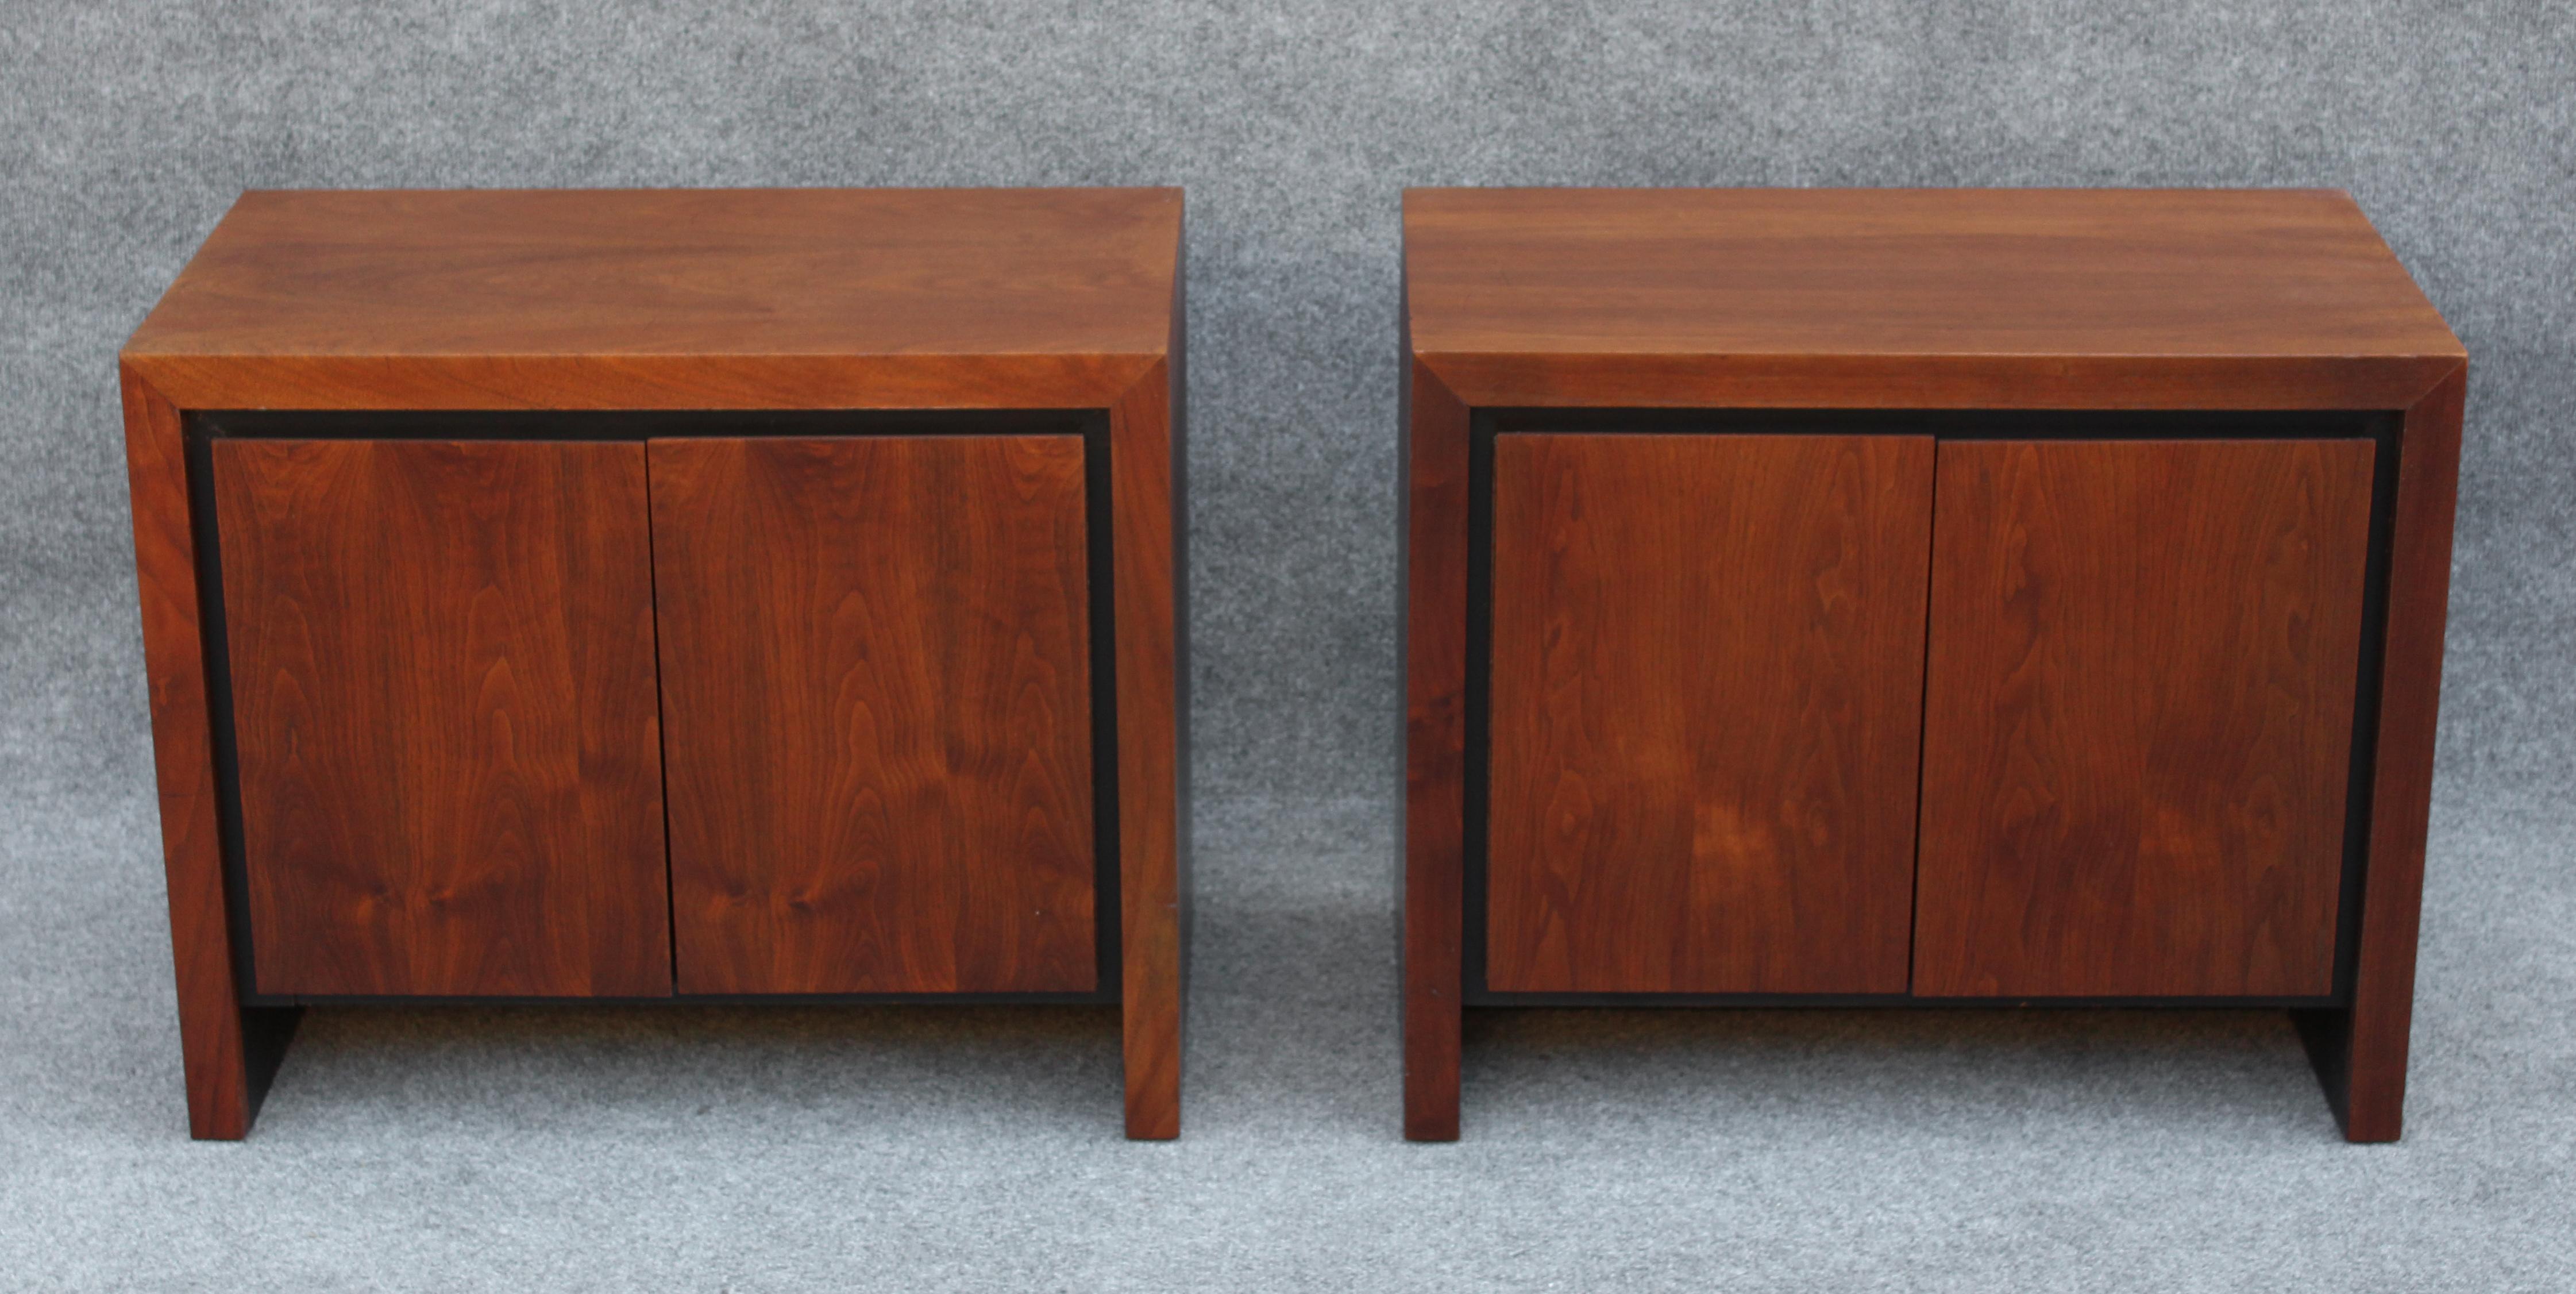 This pair of nightstands or end tables were made by Dillingham, known for their excellent craftsmanship and quality. Our pair features a classically mid-century walnut construction with handsome bookmatched doors. Their design is stoic and